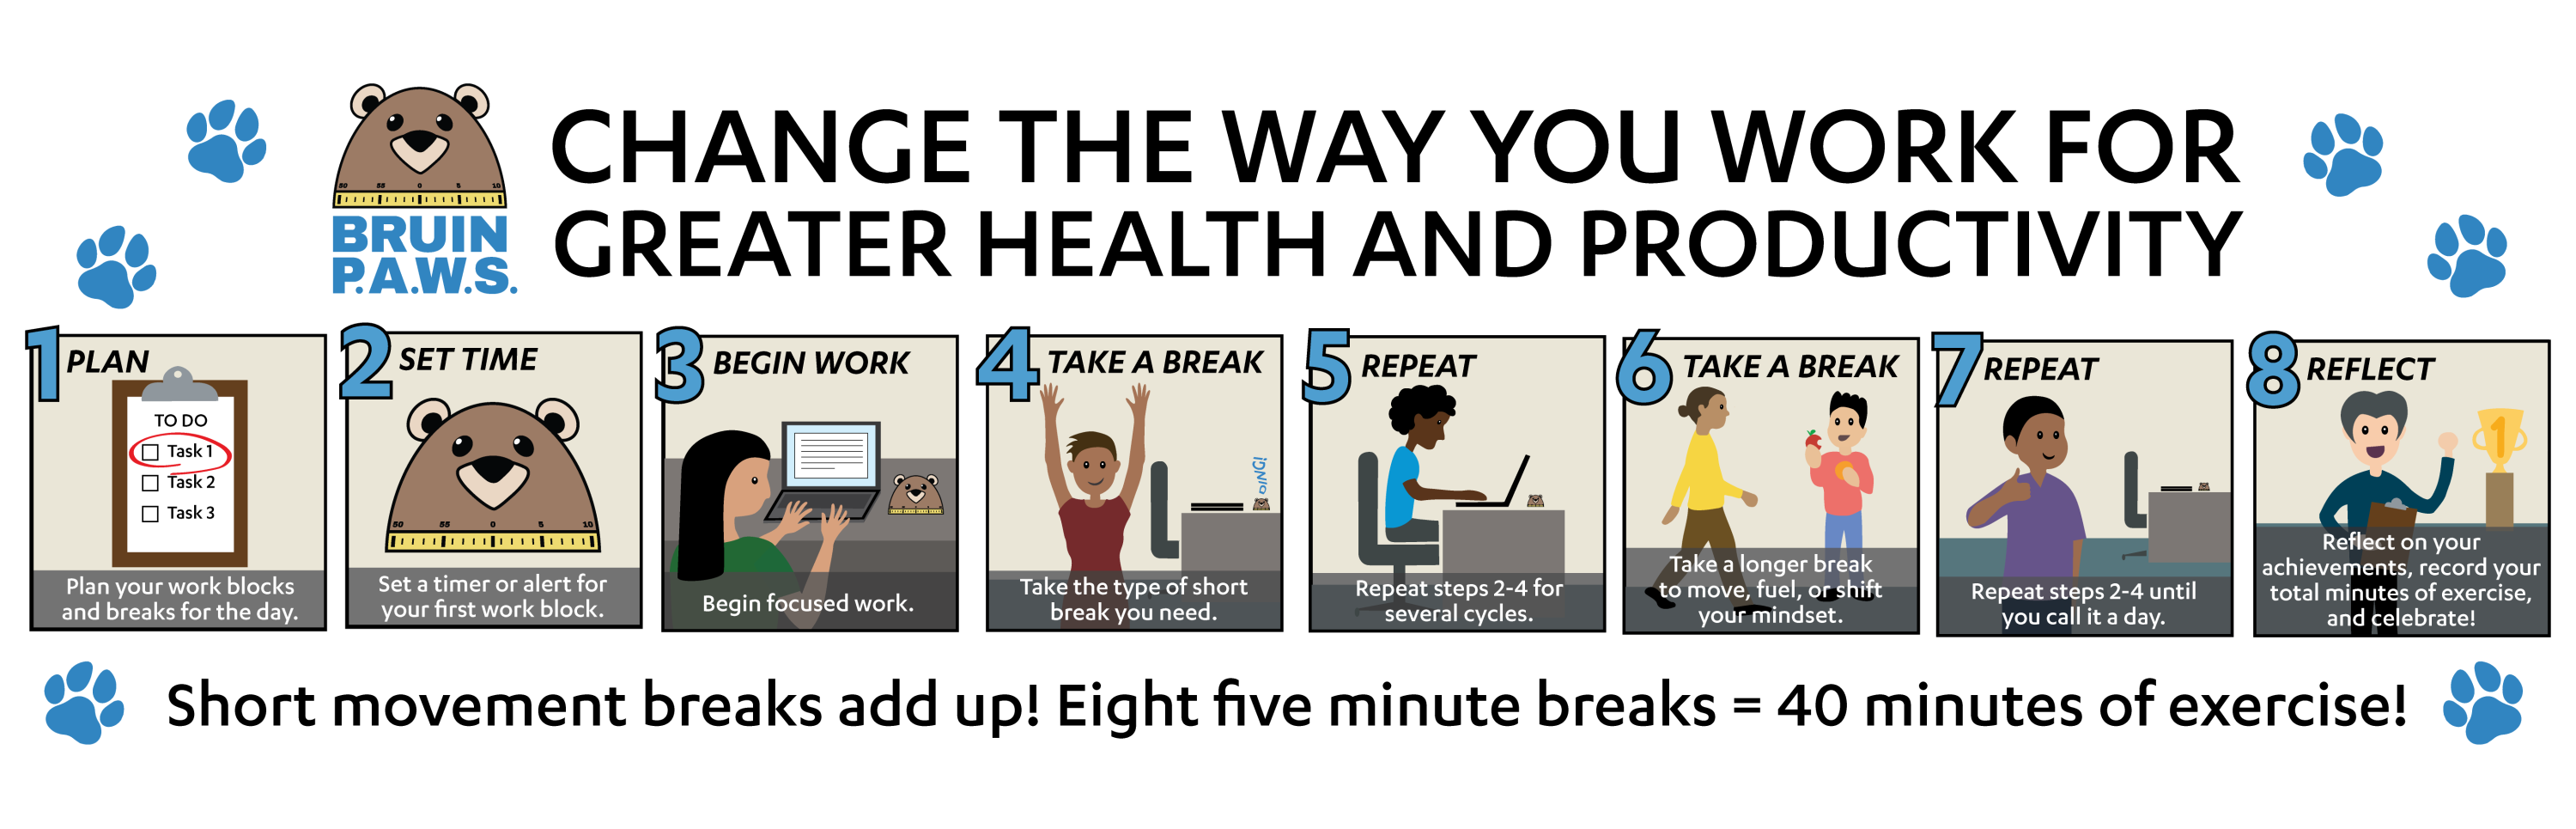 Bruin P.A.W.S. Change the Way You Work for Greater Health and Productivity. 1. Plan. 2. Set Time. 3. Begin Work. 4. Take a Break. 5. Repeat. 6. Take a Break. 7. Repeat. 8. Reflect. Short movement breaks add up! Eight five minute breaks = 40 minutes of exercise!